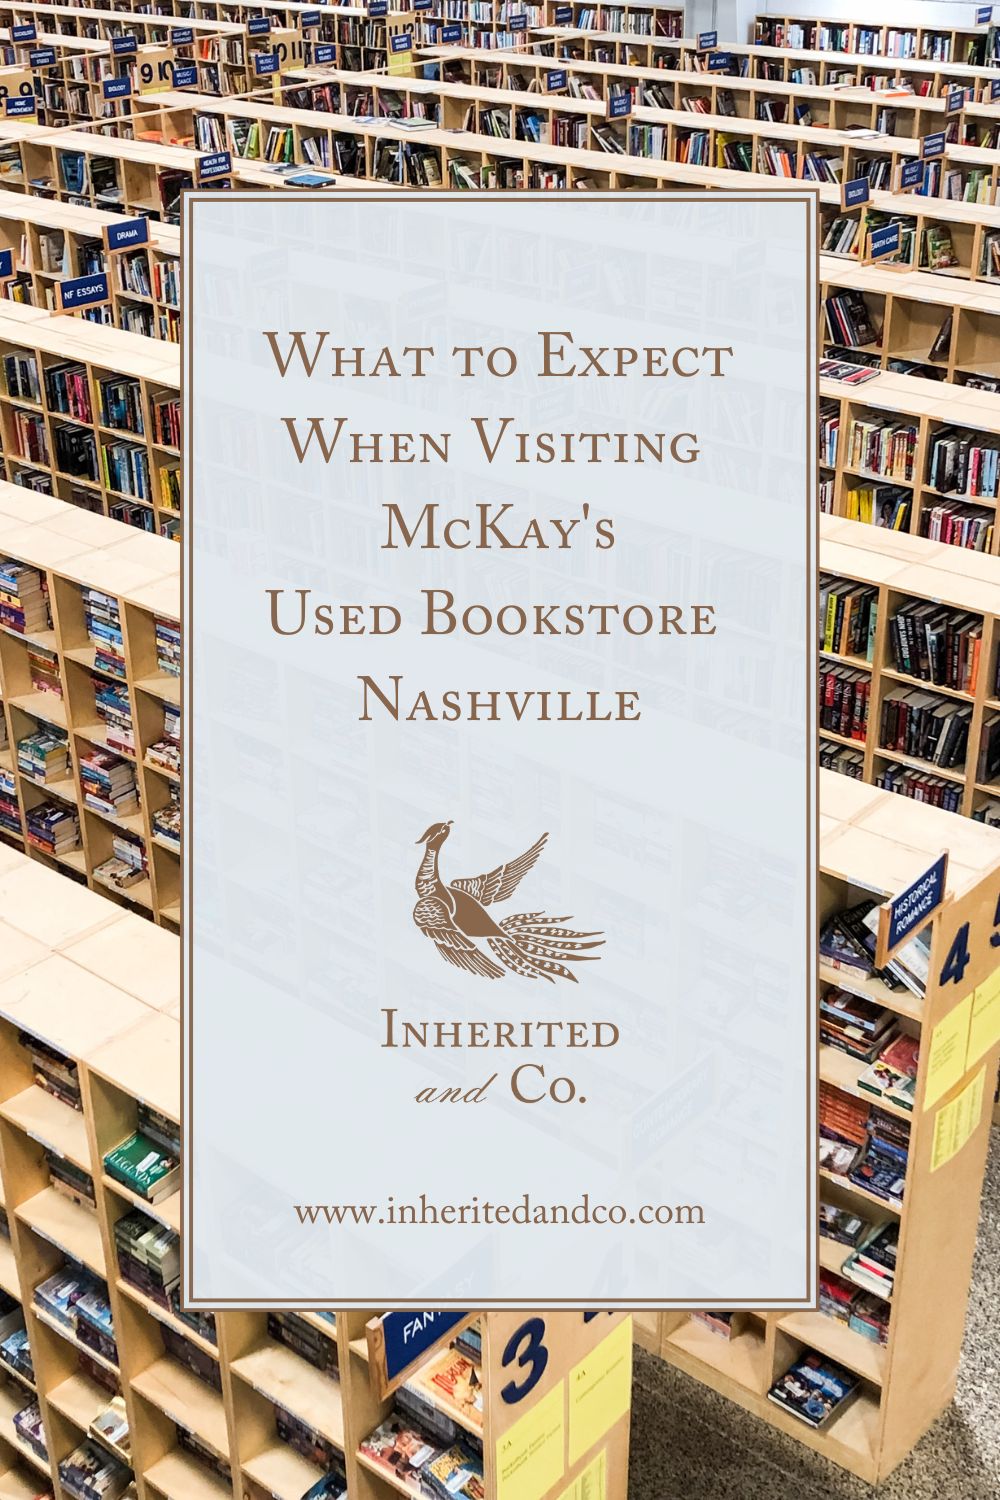 What to Expect When Visiting McKay's Used Bookstore Nashville